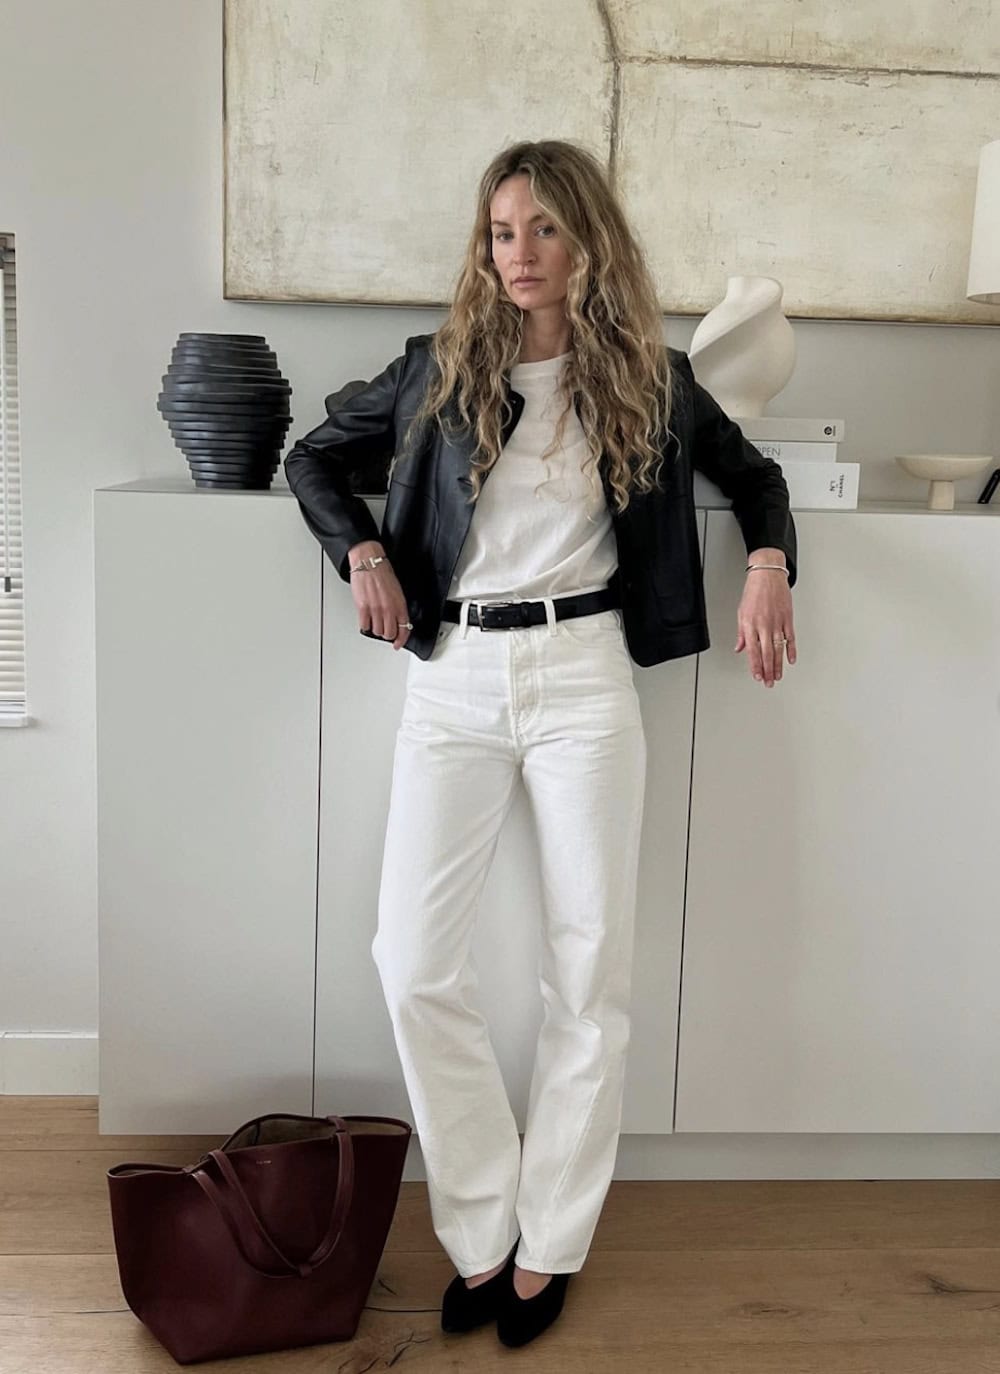 Woman wearing white jeans, black pumps, a white t-shirt and a black leather jacket.